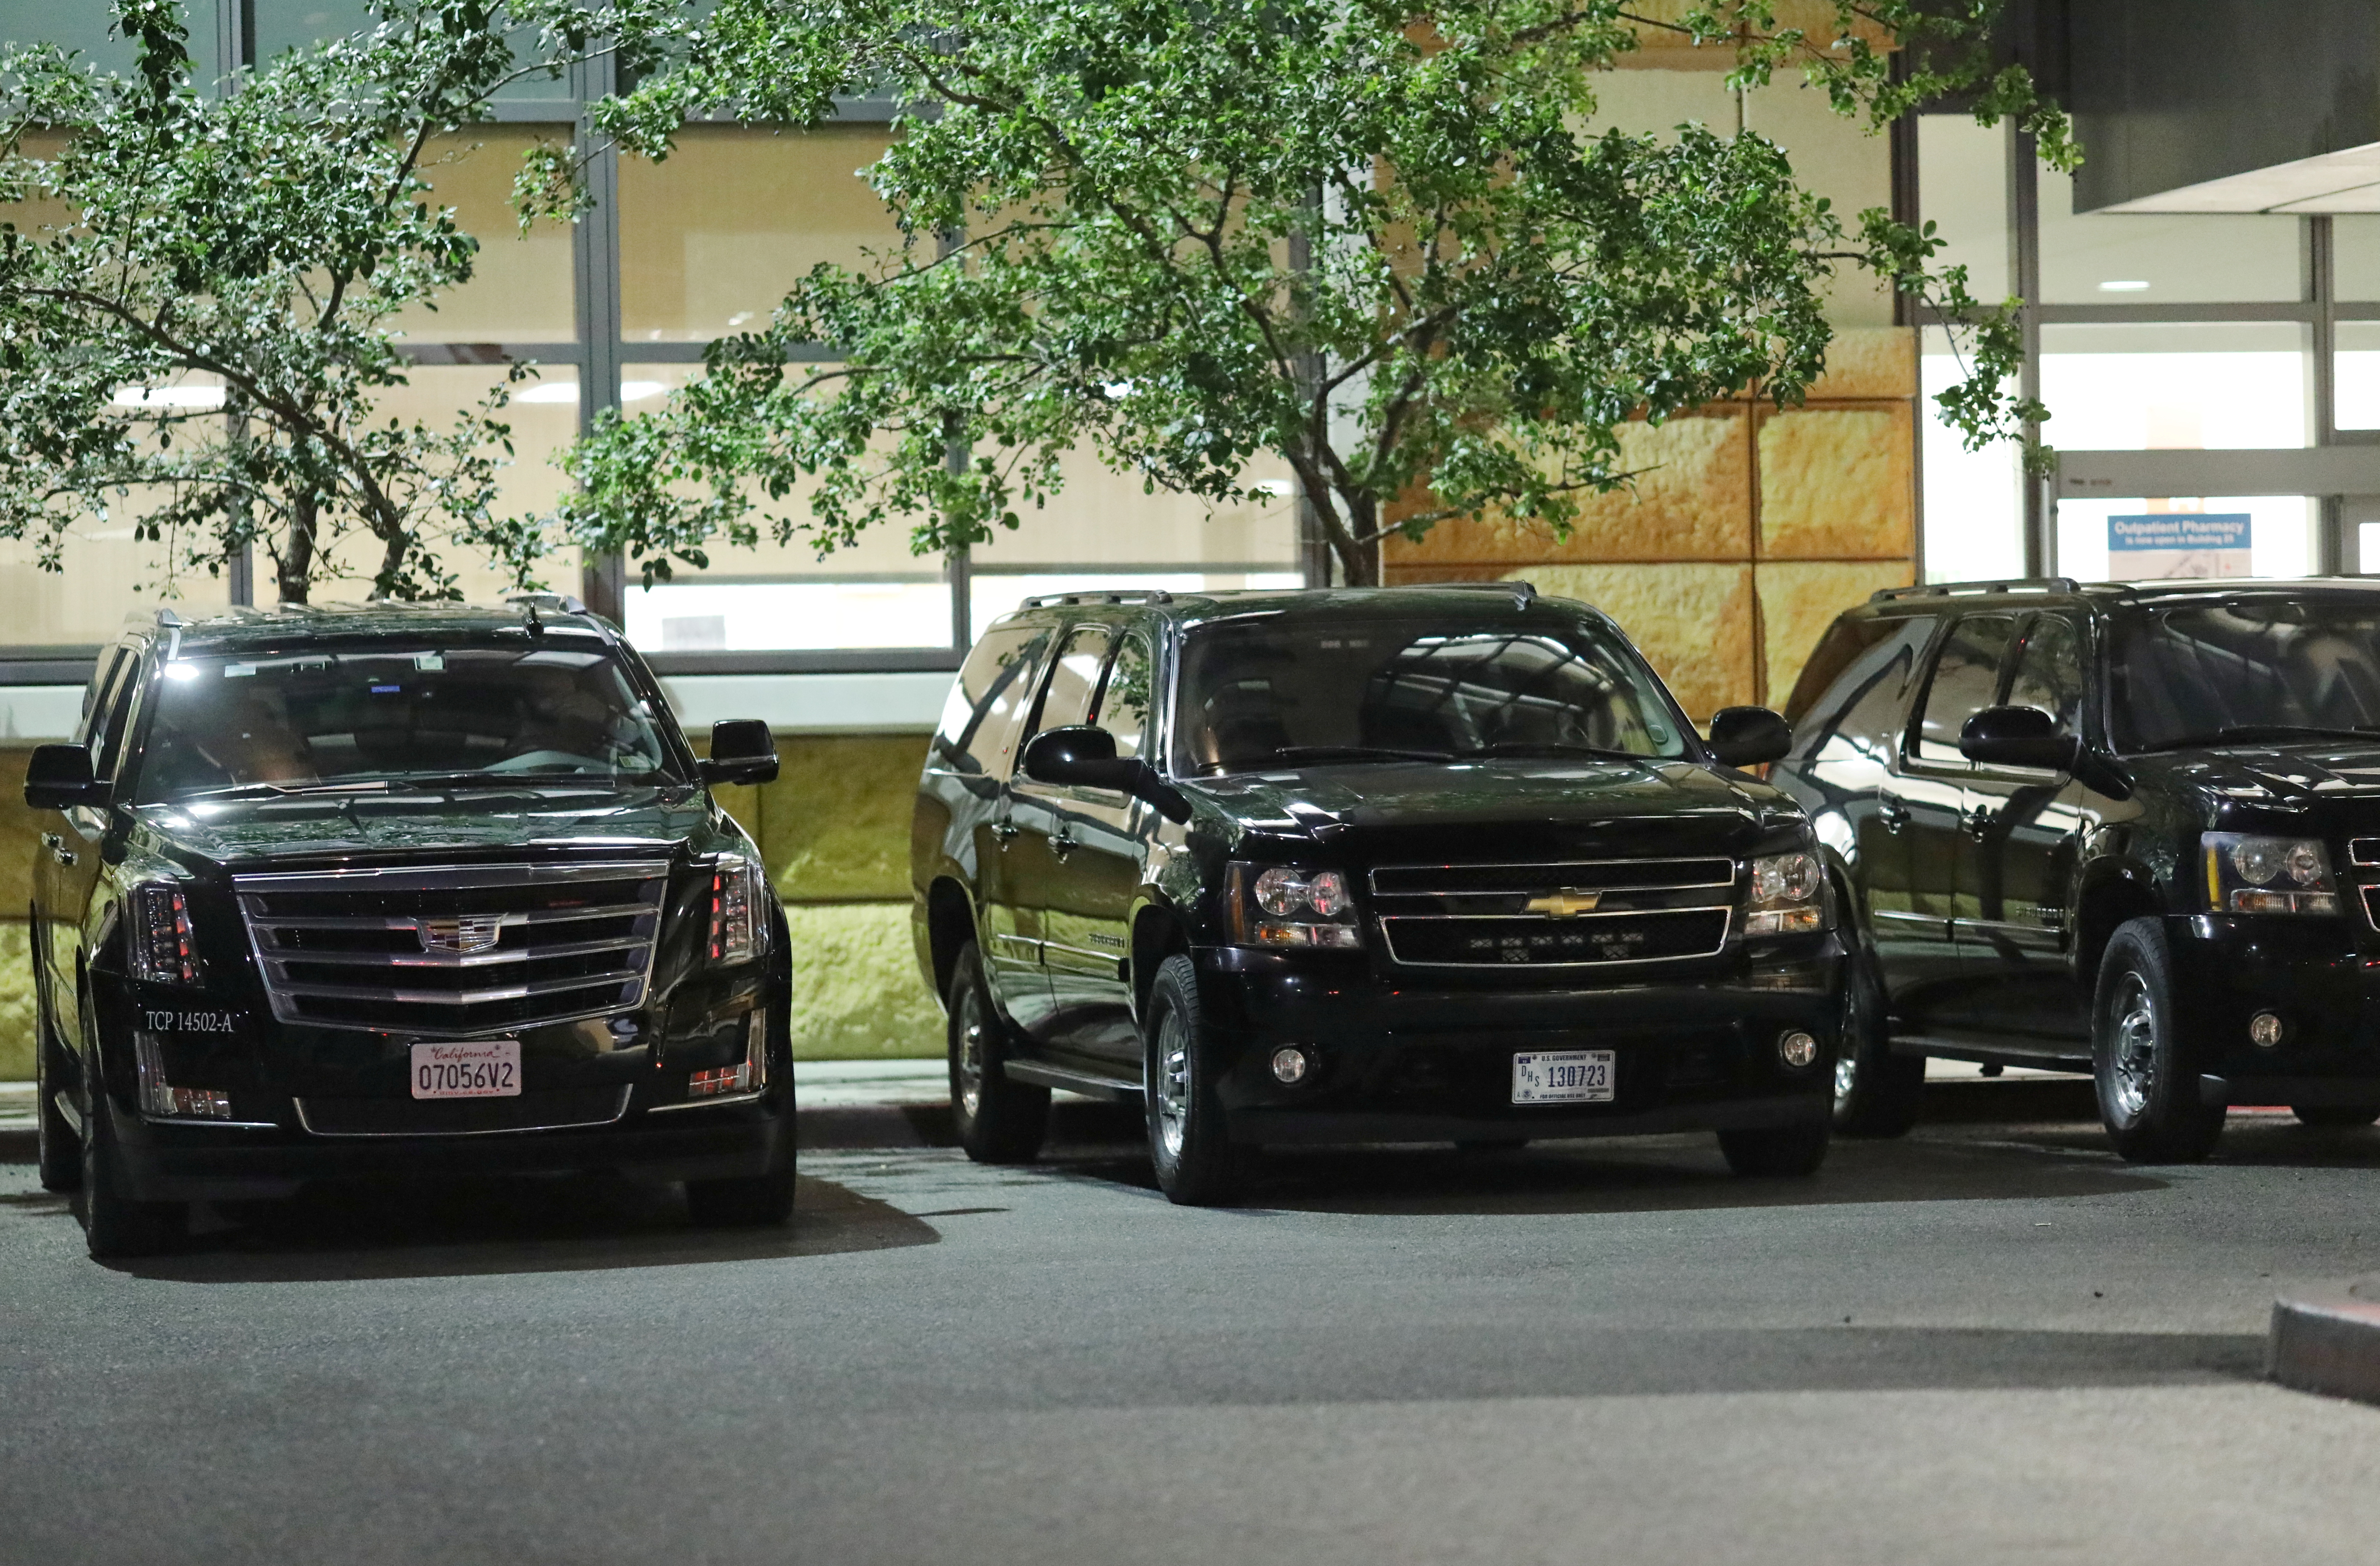 The motorcade of former U.S. President Bill Clinton wait at the University of California Irvine Douglas Hospital, after Clinton was admitted to the UCI Medical Center, in Orange